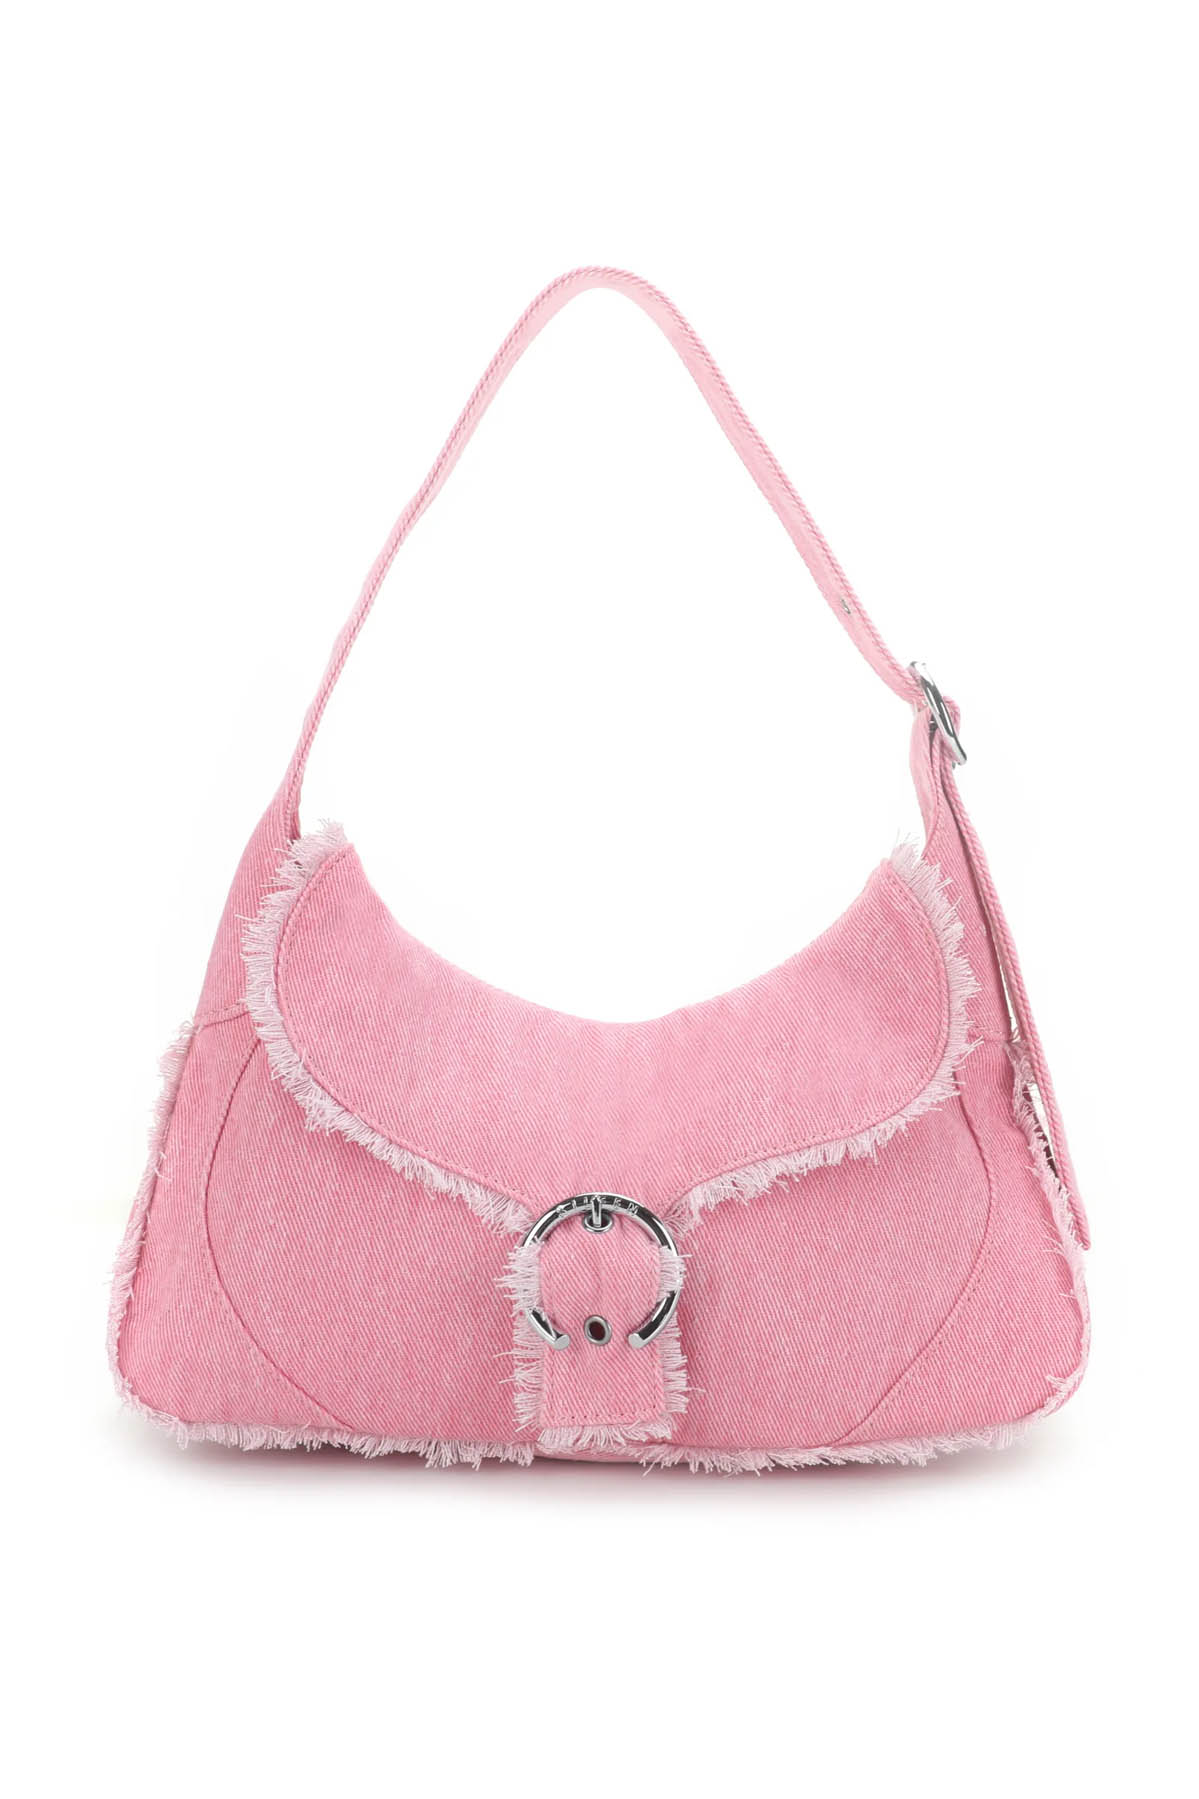 THE RECYCLED THEA SHOULDER BAG - PINK DENIM - EXCLUSIVE Bags from SILFEN - Just €79.99! SHOP NOW AT IAMINHATELOVE BOTH IN STORE FOR CYPRUS AND ONLINE WORLDWIDE @ IAMINHATELOVE.COM